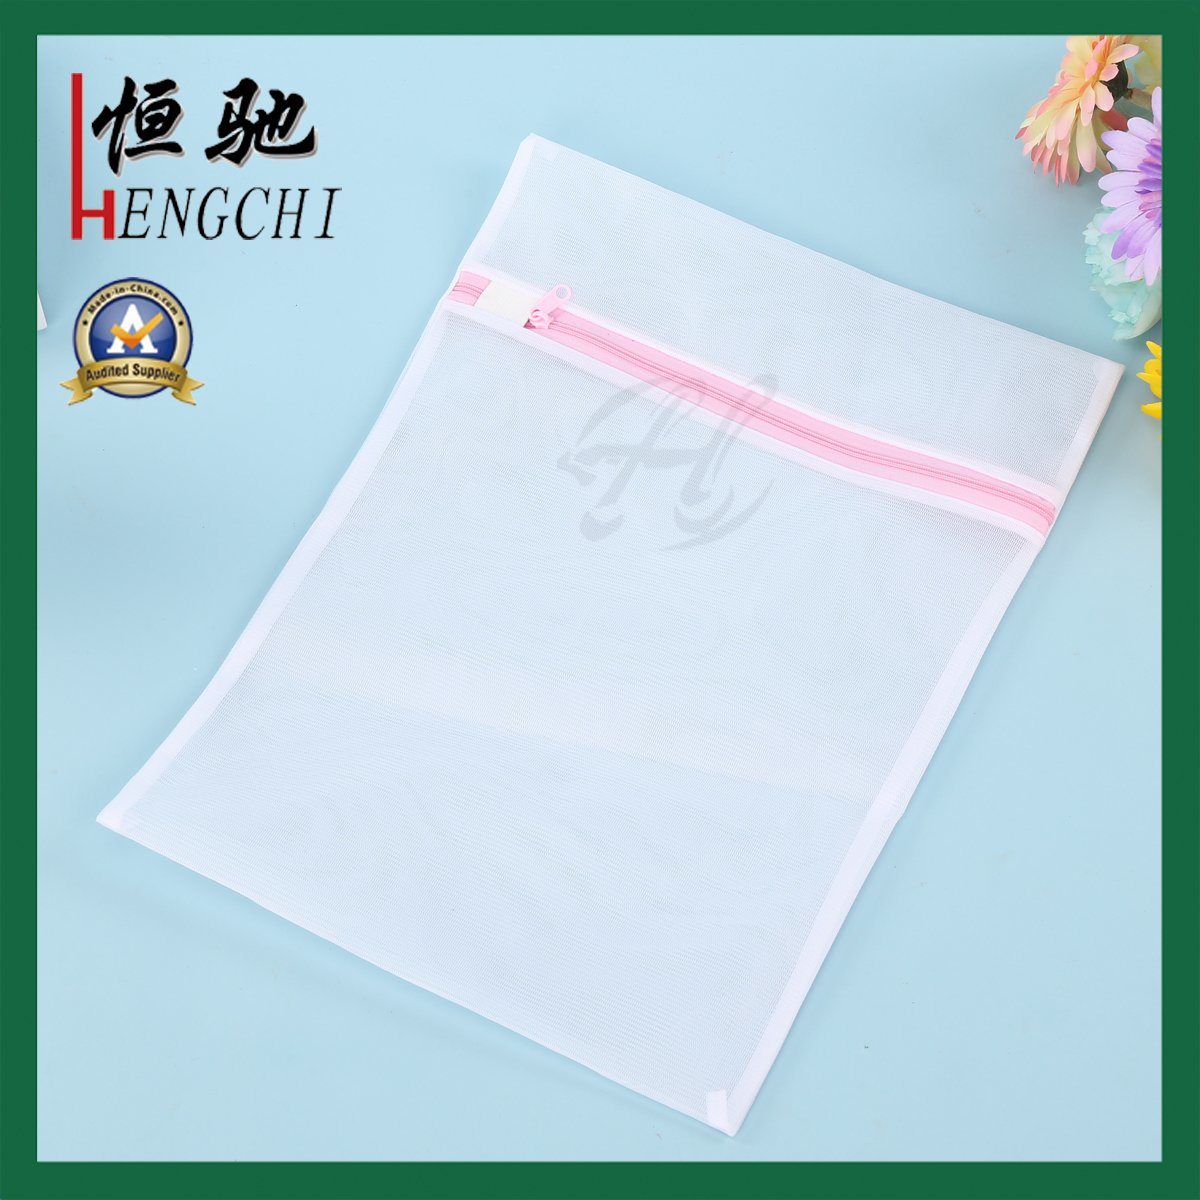 Promotional Reusable Household Washing Nets Laundry Bags